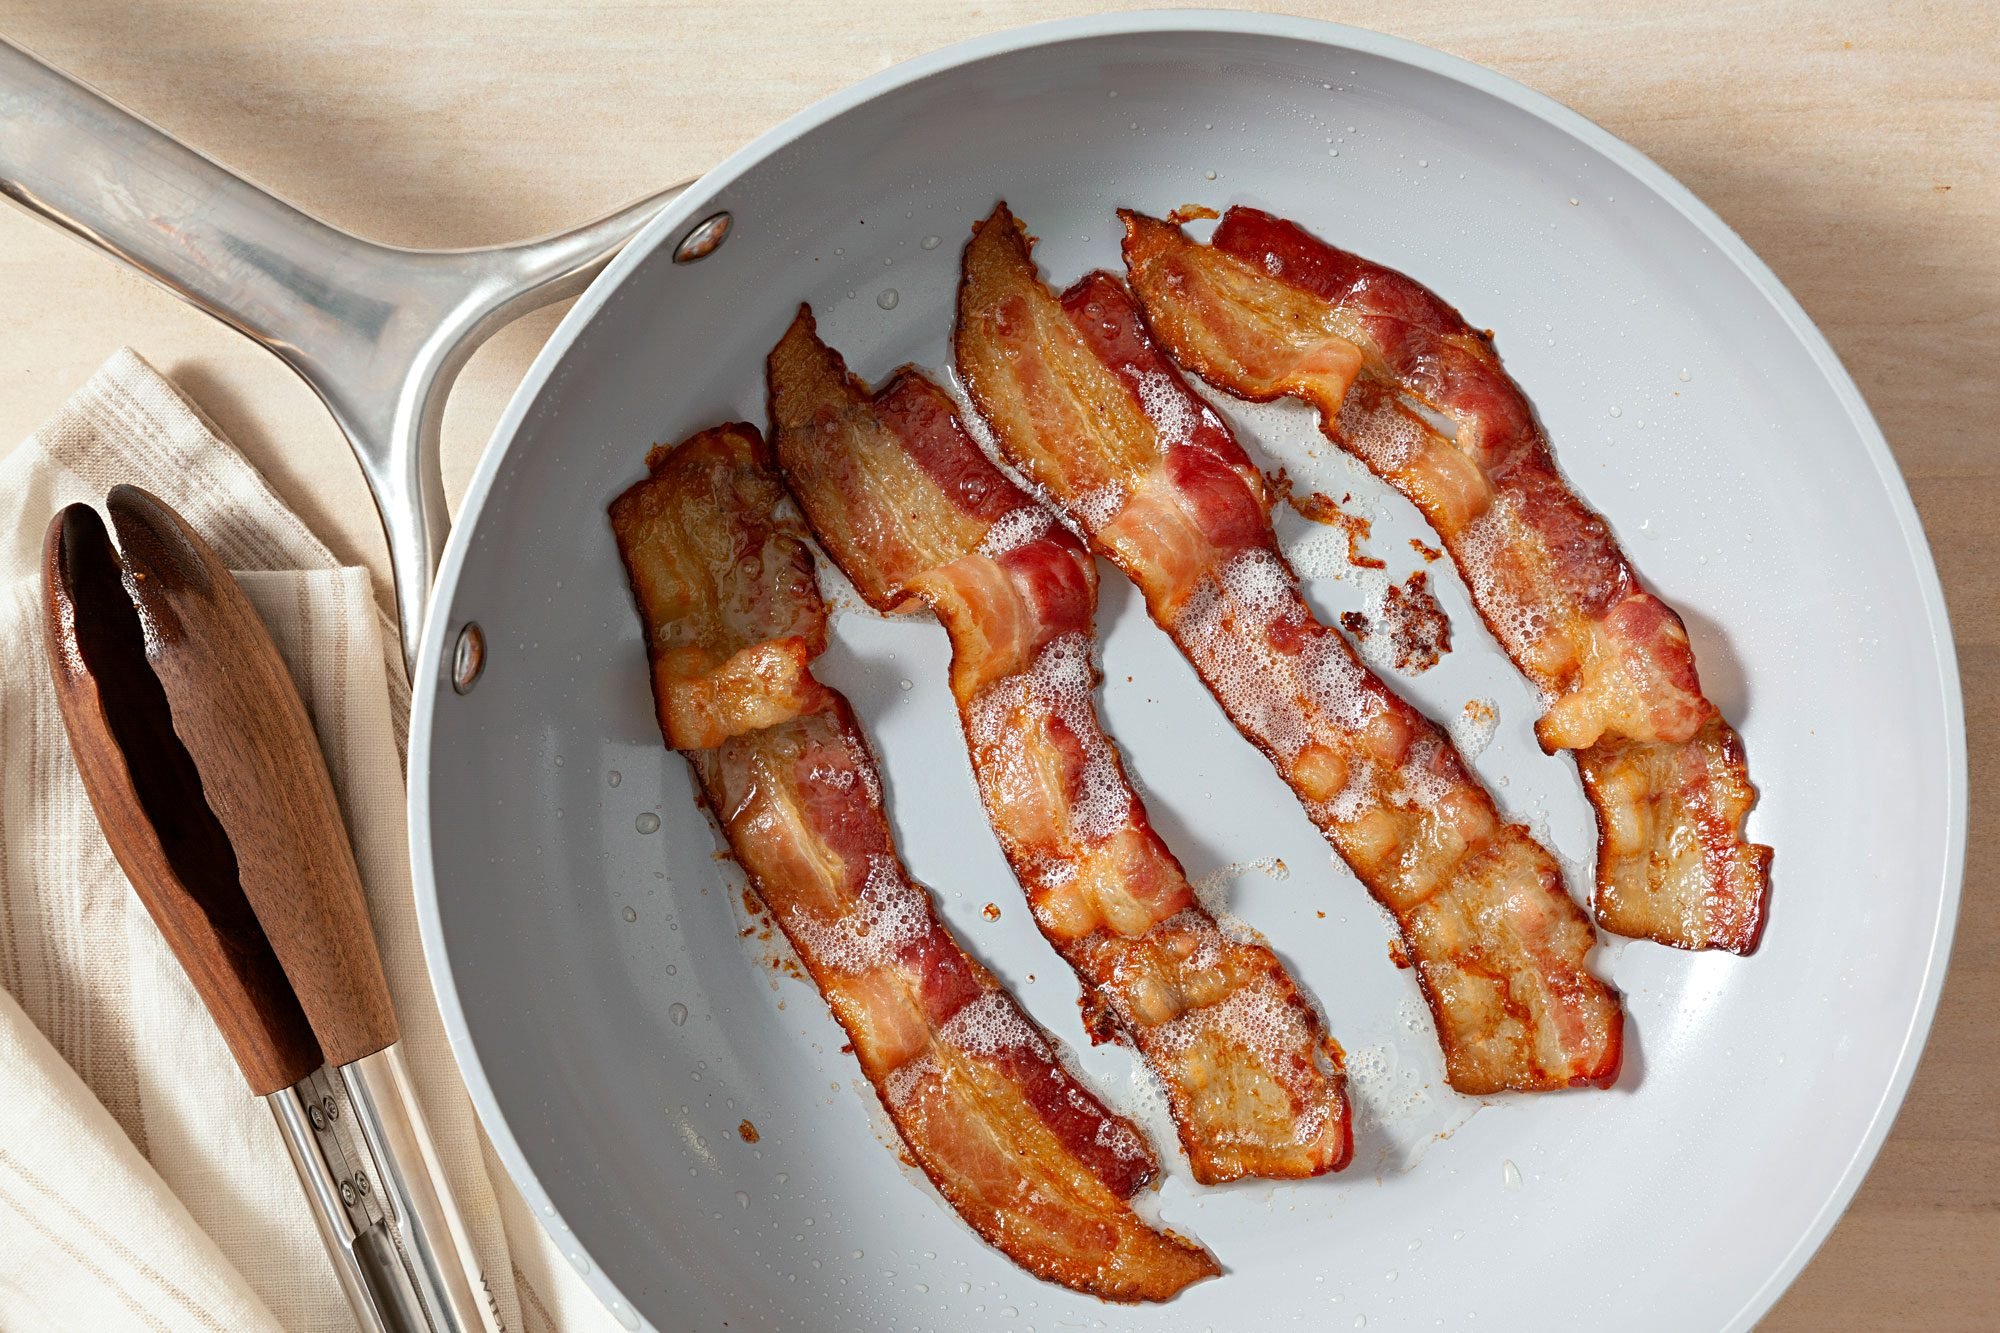 Cook the bacon over medium heat until it’s crisp in a large skillet